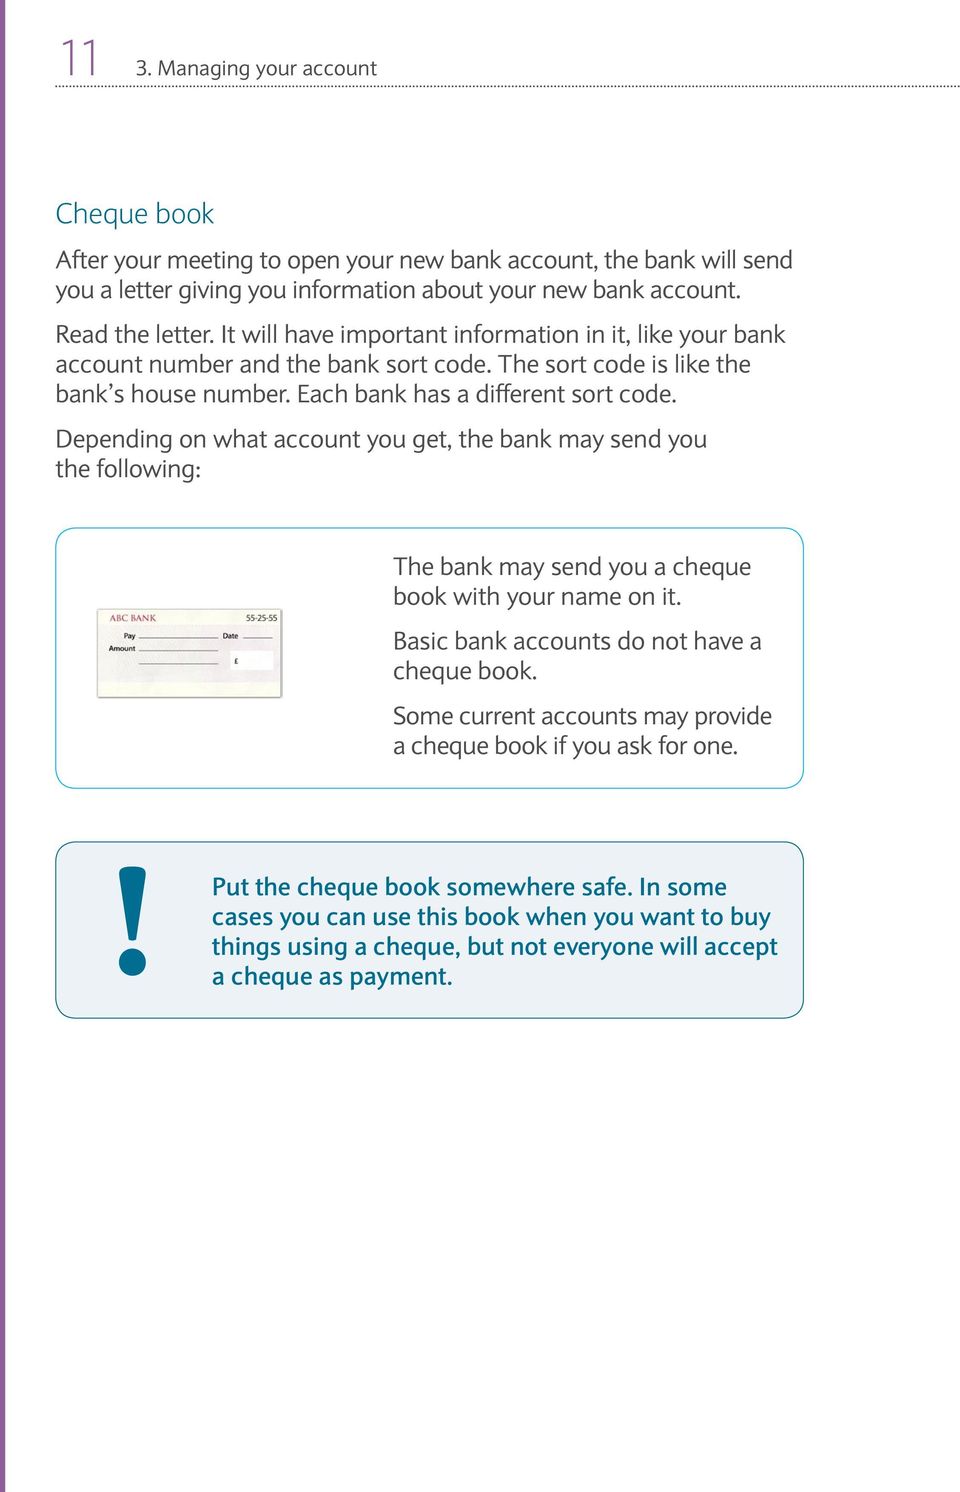 Depending on what account you get, the bank may send you the following: The bank may send you a cheque book with your name on it. Basic bank accounts do not have a cheque book.